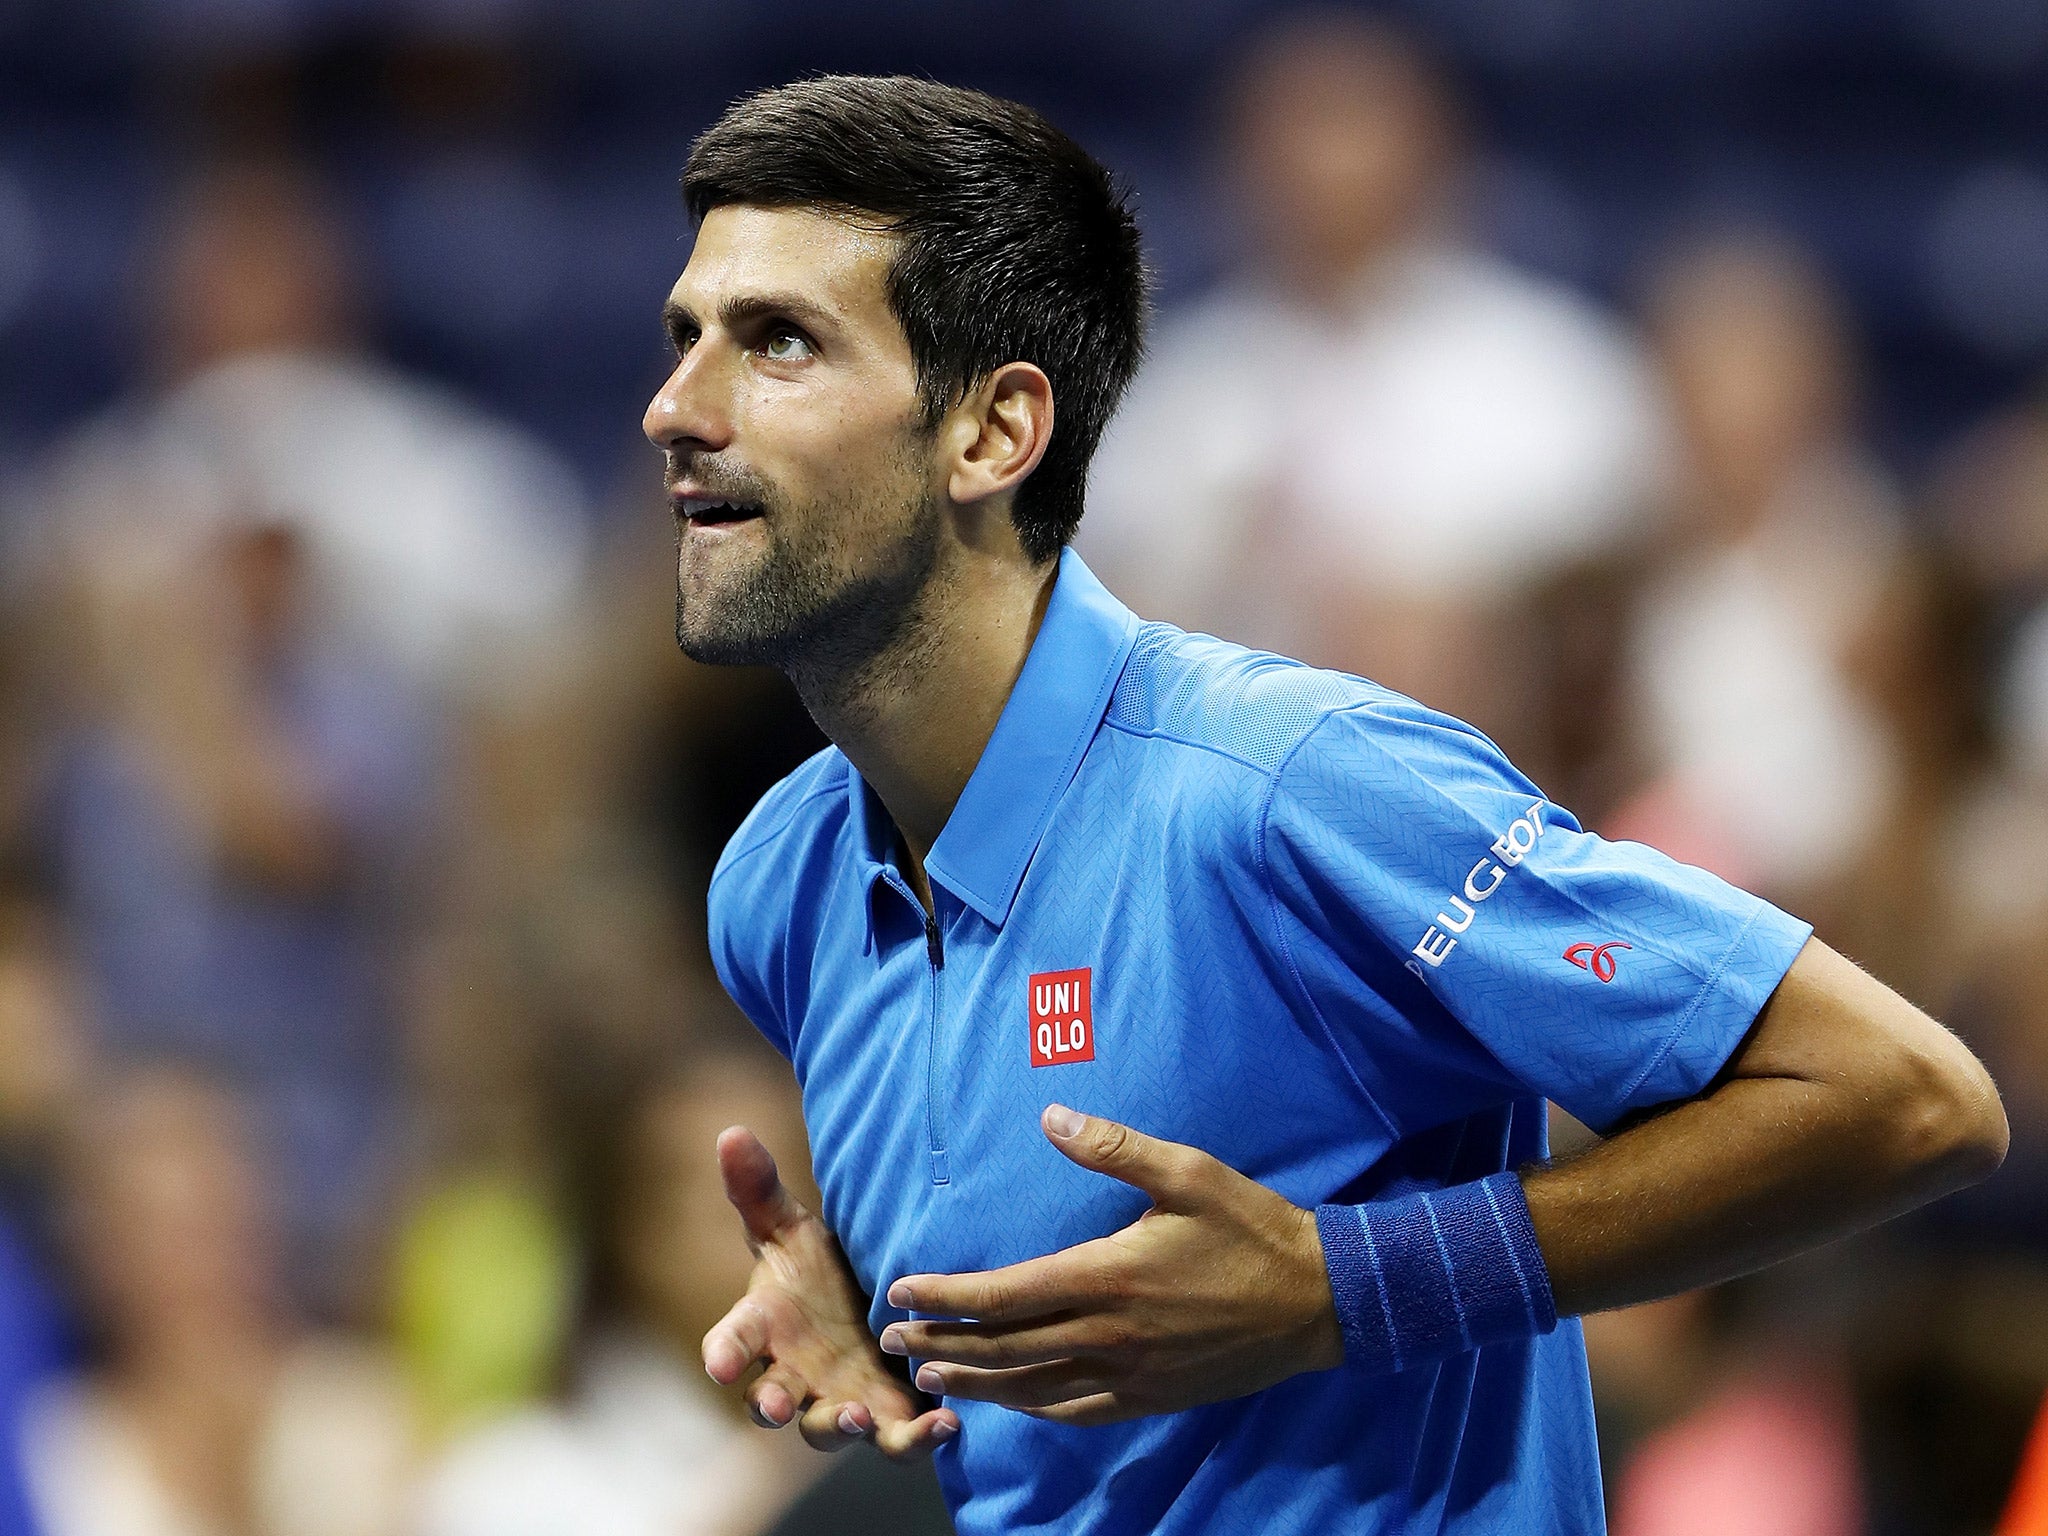 Novak Djokovic celebrates after beating Jerzy Janowicz in the first round of the US Open